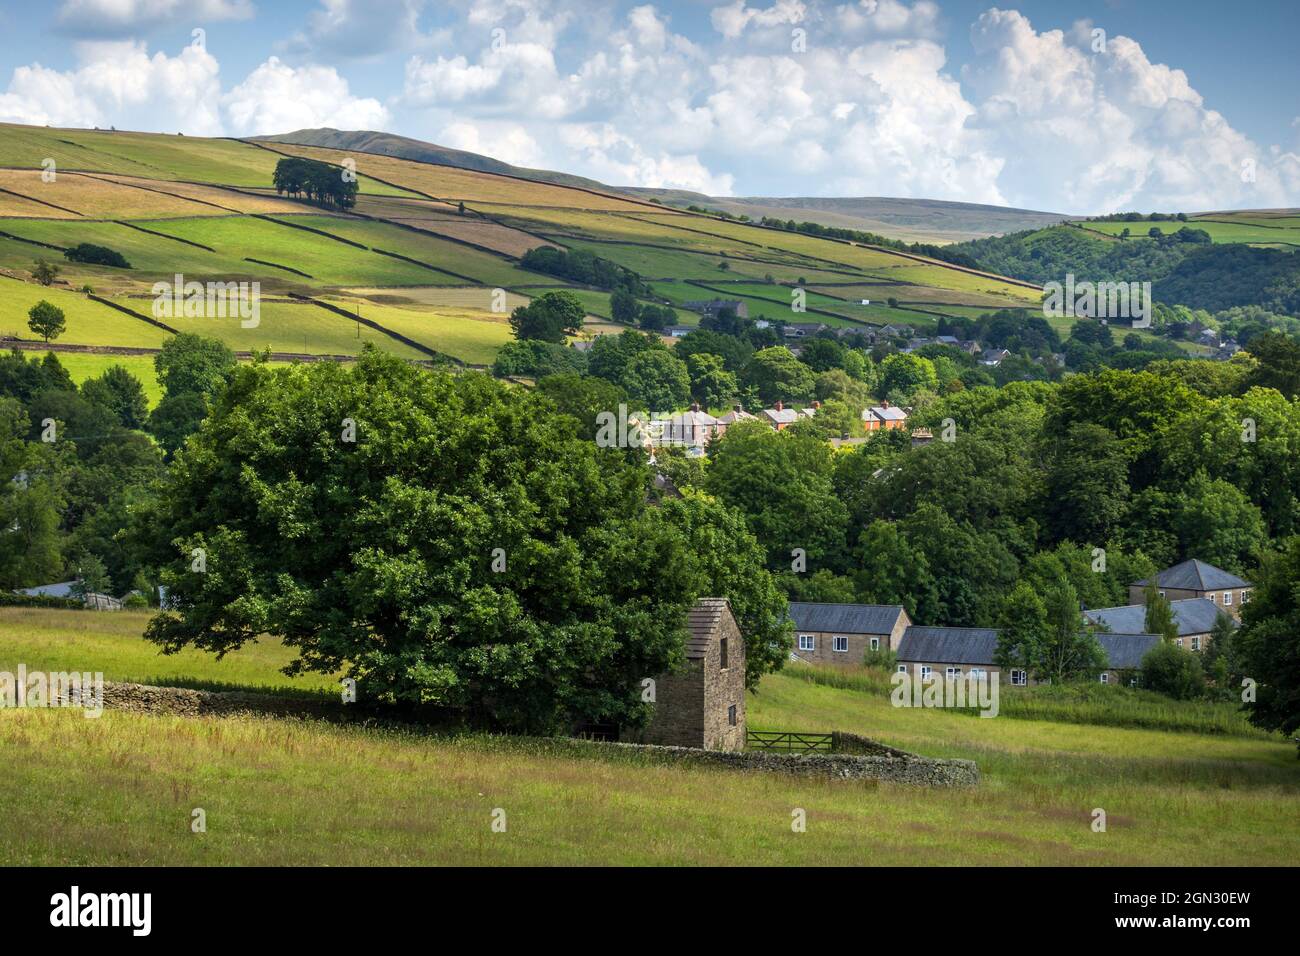 A view over the village of Hayfield in High Peak, Derbyshire. The copse of trees known as Twenty Trees can be seen on the distant hillside. Stock Photo